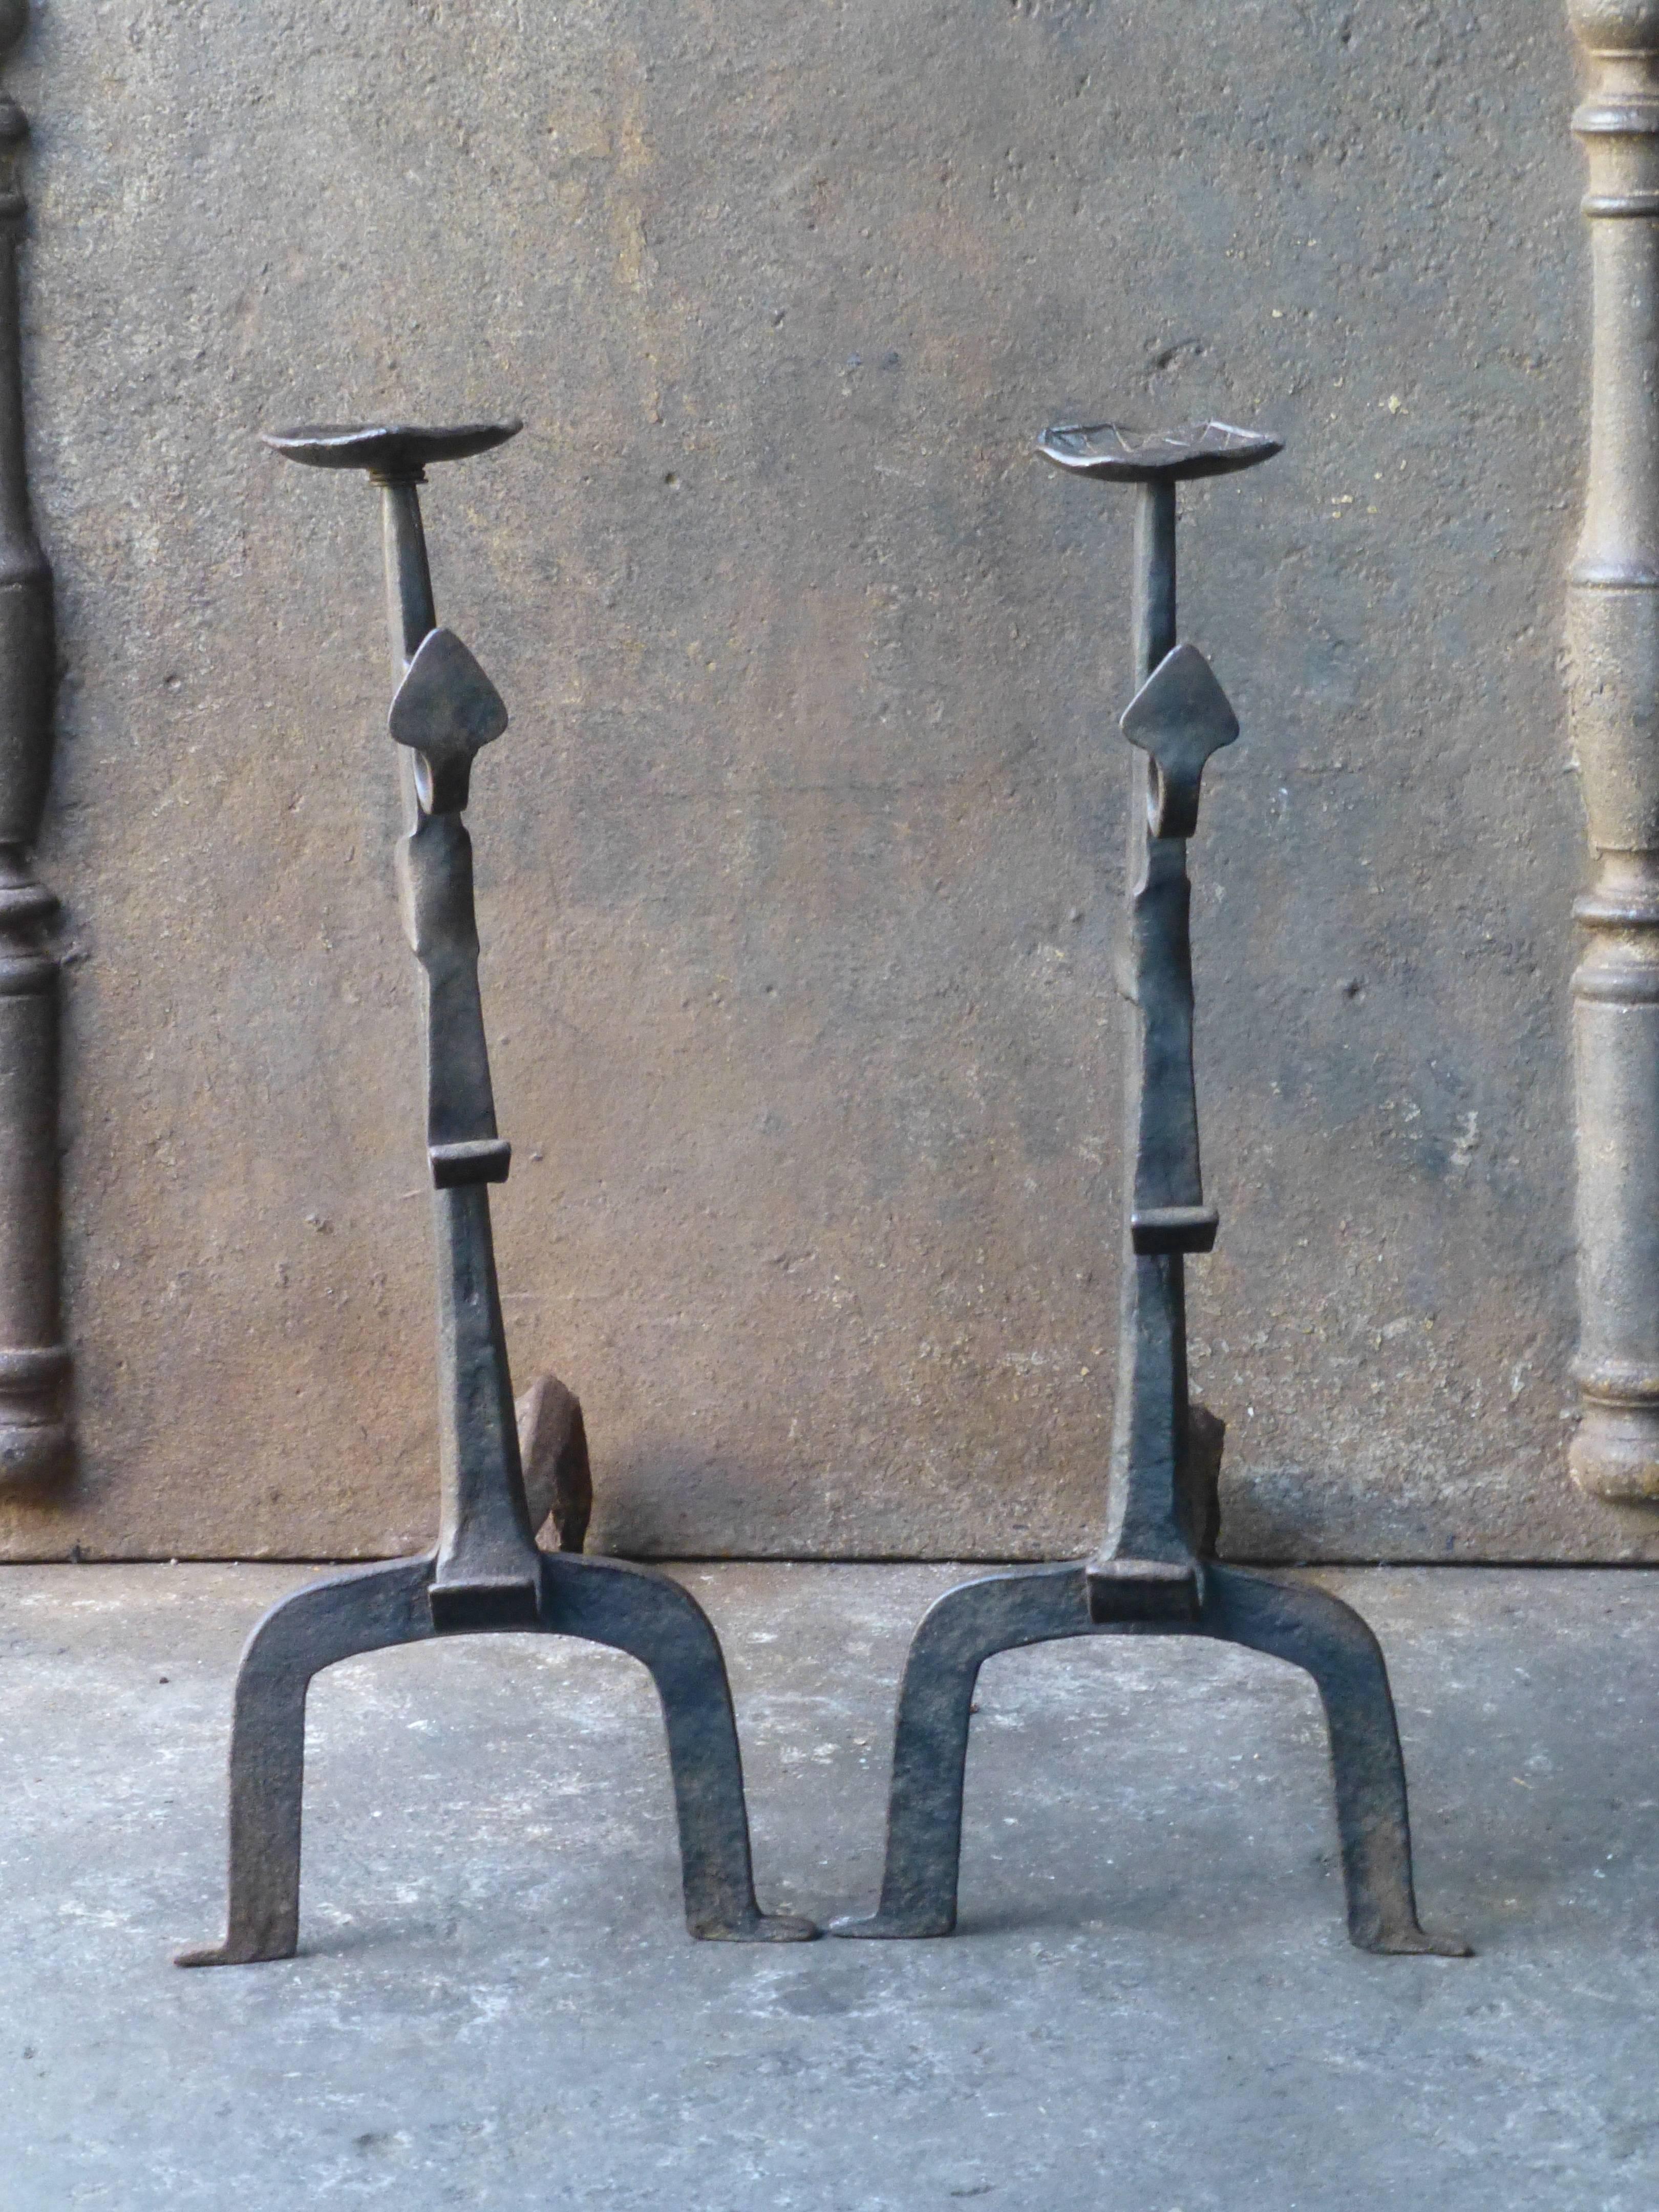 18th century French andirons, fire dogs made of wrought iron. These French andirons are called 'landiers' in France. This dates from the times the andirons were the main cooking equipment in the house. They had spit hooks to grill meat or poultry